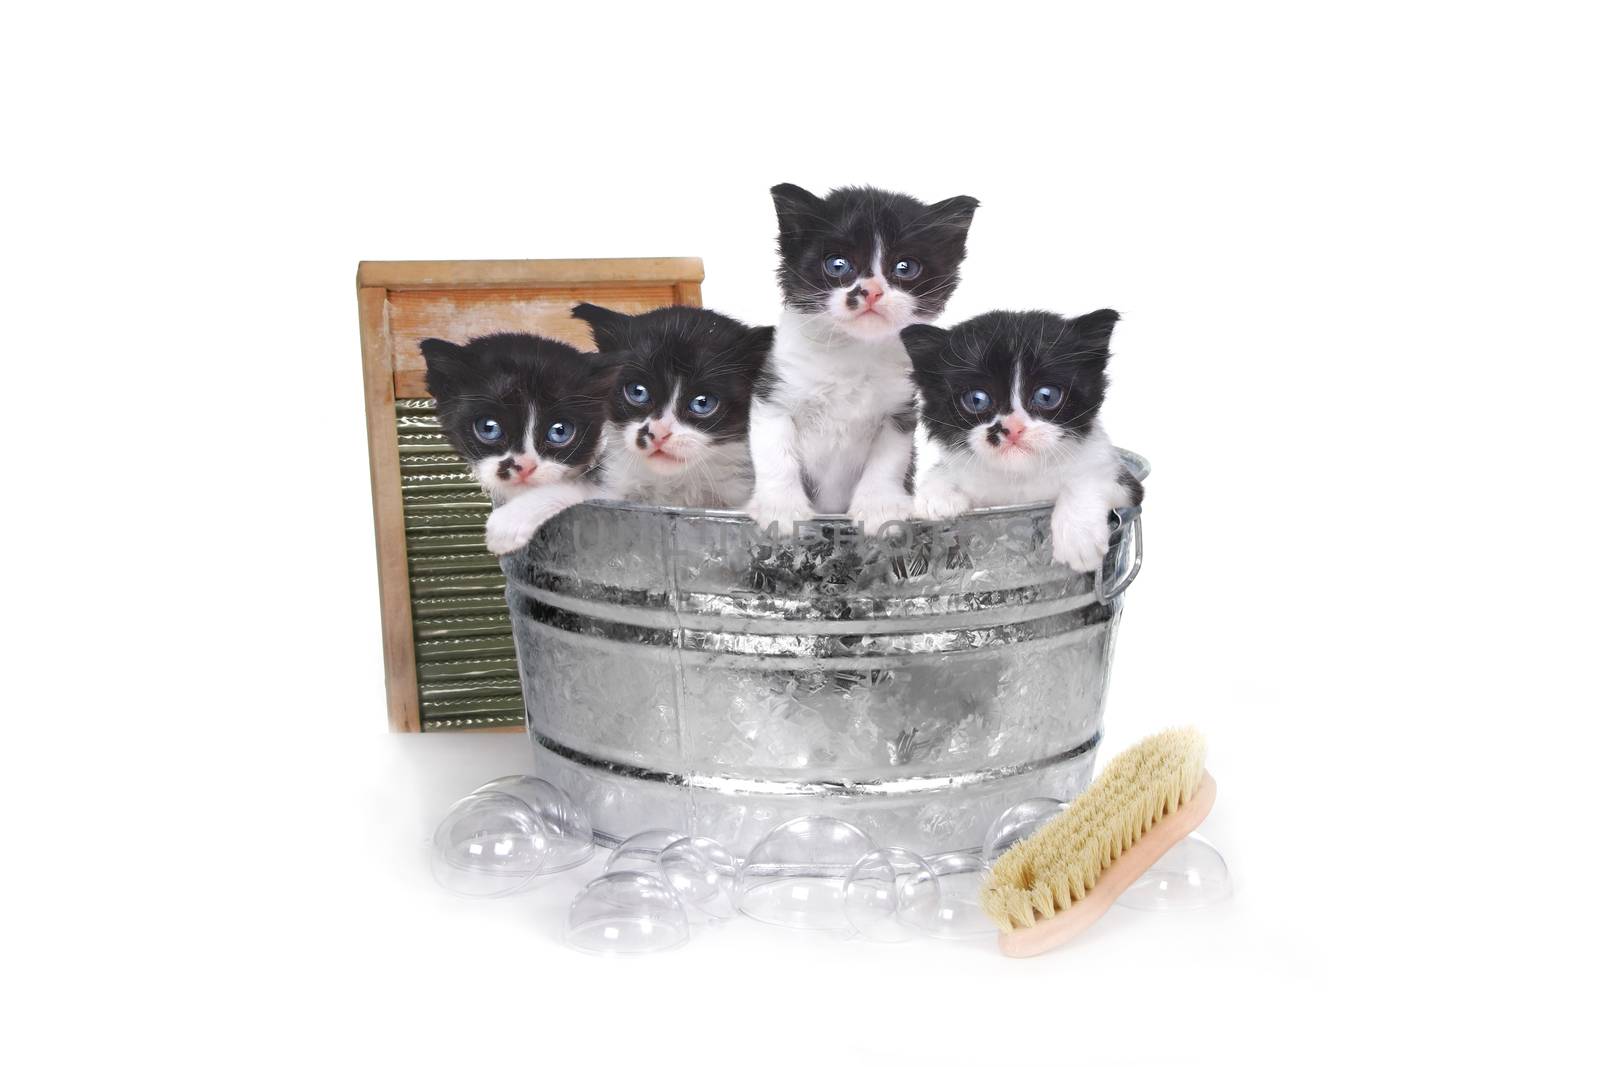 Adorable Kittens Taking a Bath in a Washtub With Brush and Bubbles